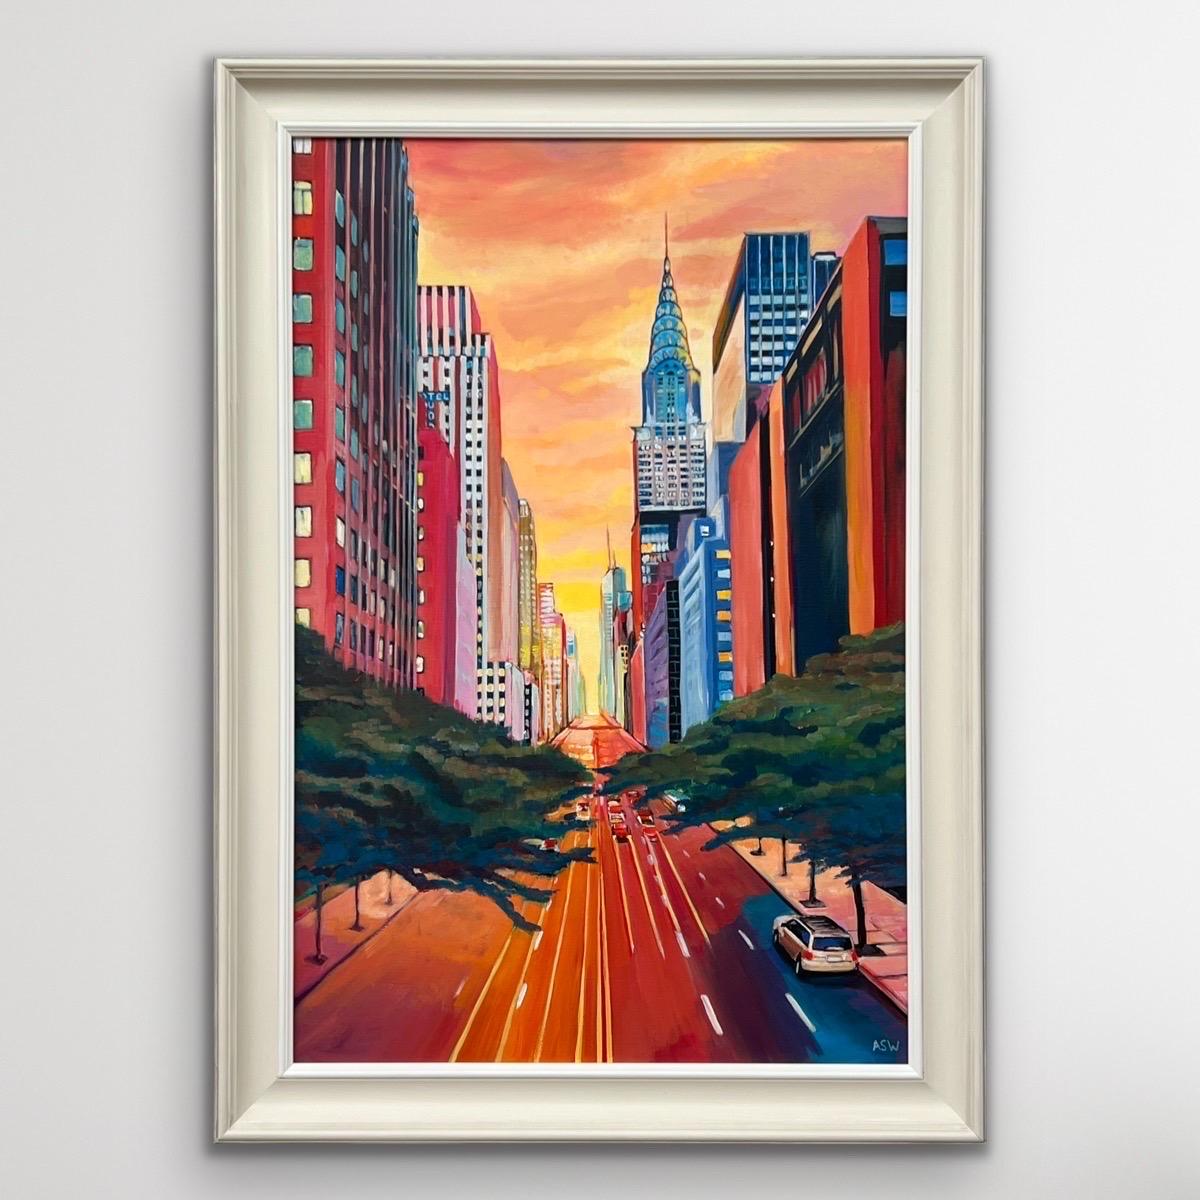 Painting of the Chrysler Building 42nd Street New York City by Contemporary British Artist, Angela Wakefield. Painted using warm golden oranges, reds and yellows - capturing the dramatic Manhattan Henge sunset. 

Art measures 24 x 36 inches 
Frame